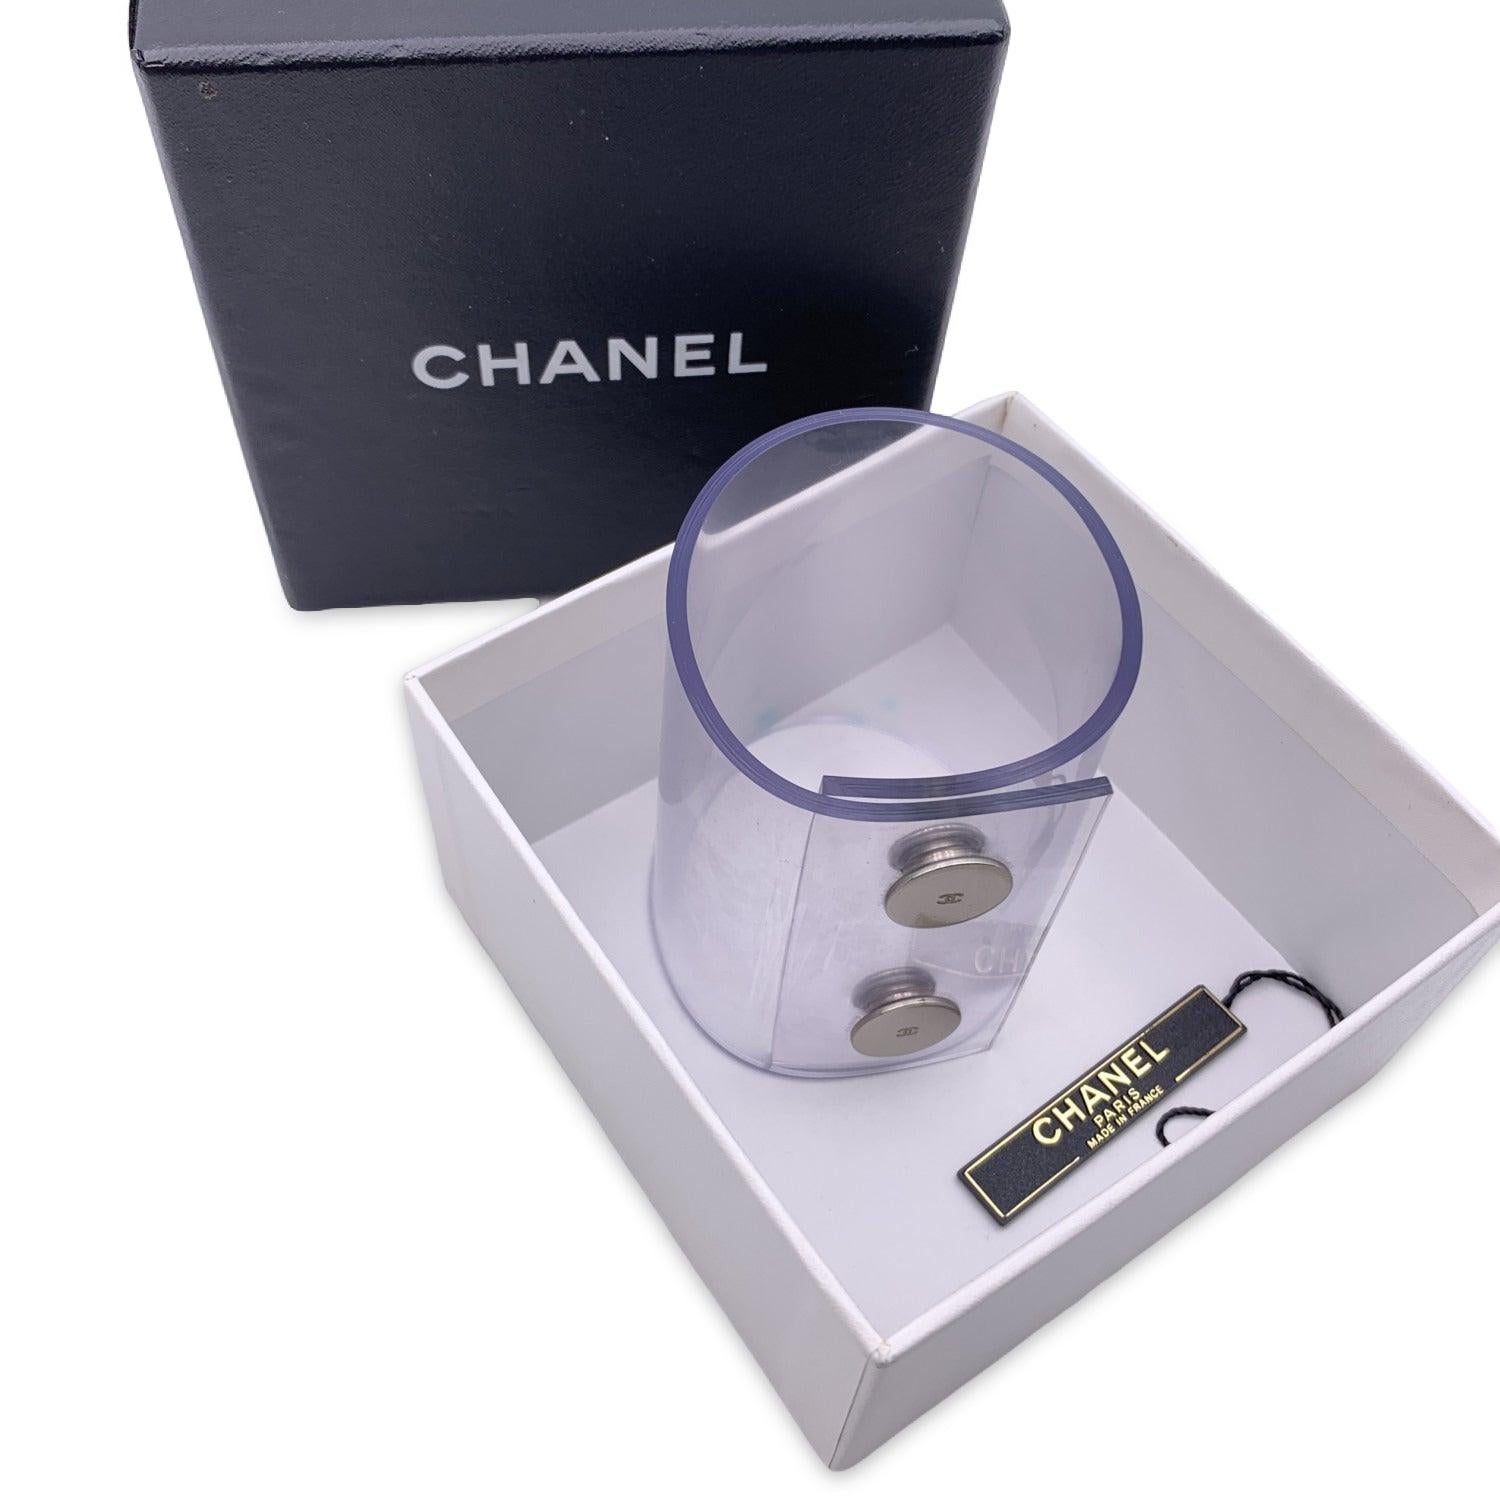 Lovely wide bracelet by CHANEL. Oversized soft plastic band with two snap buttons closing. CC - Chanel logo engraved on the buttons. Stamped 'Chanel - 00 CC C - Made in France' . Height: 2.75 inches - 7 cm. Will fit up to approx. 6.75 inches - 17. 2